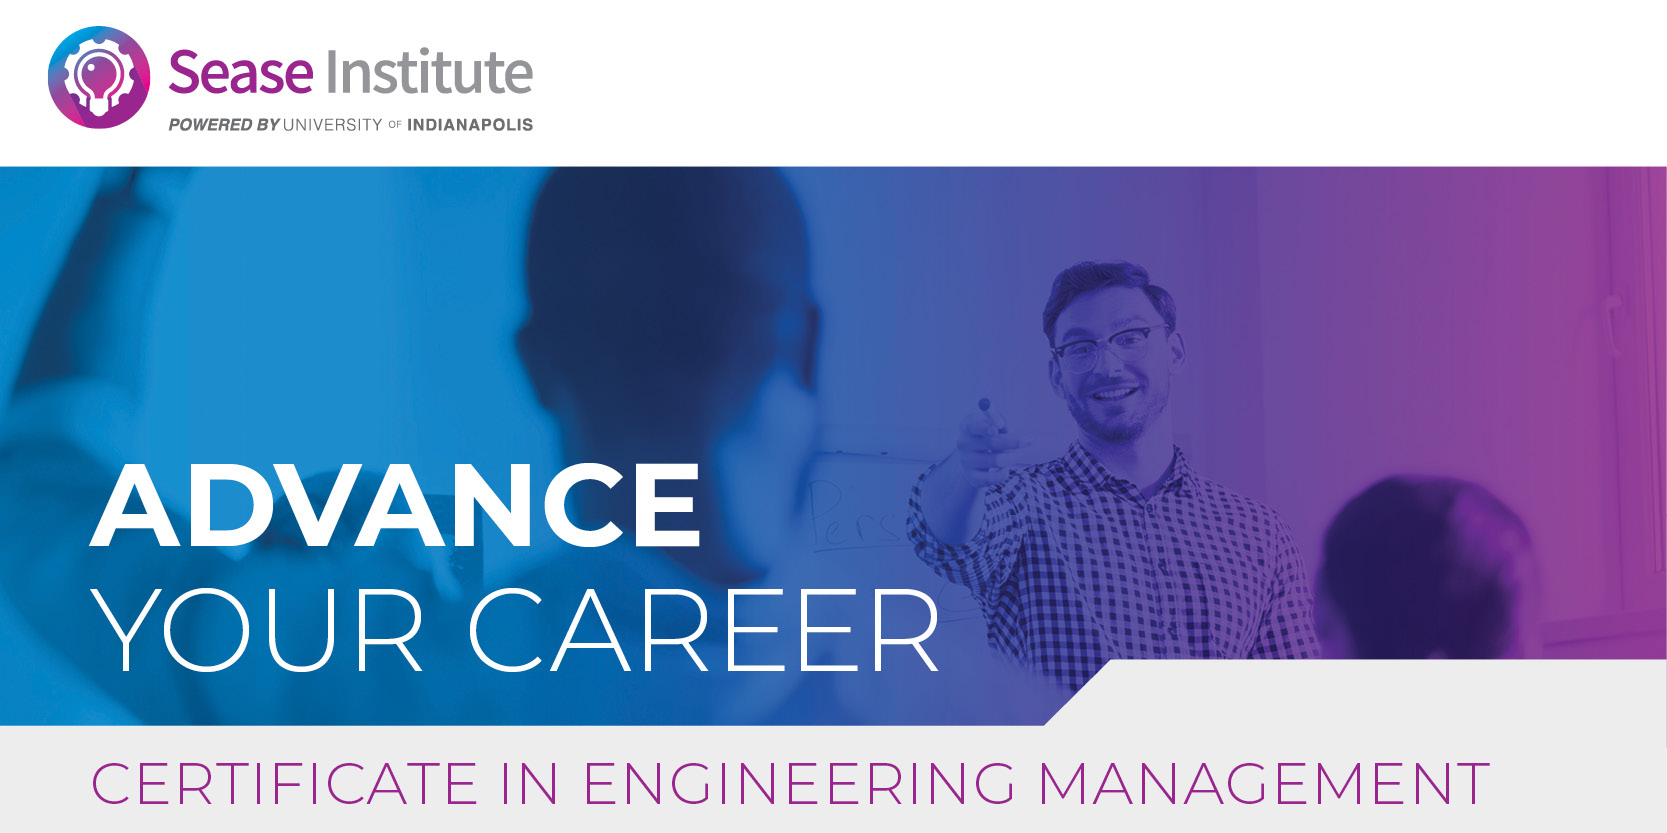 Sease Institute: Advance Your Career